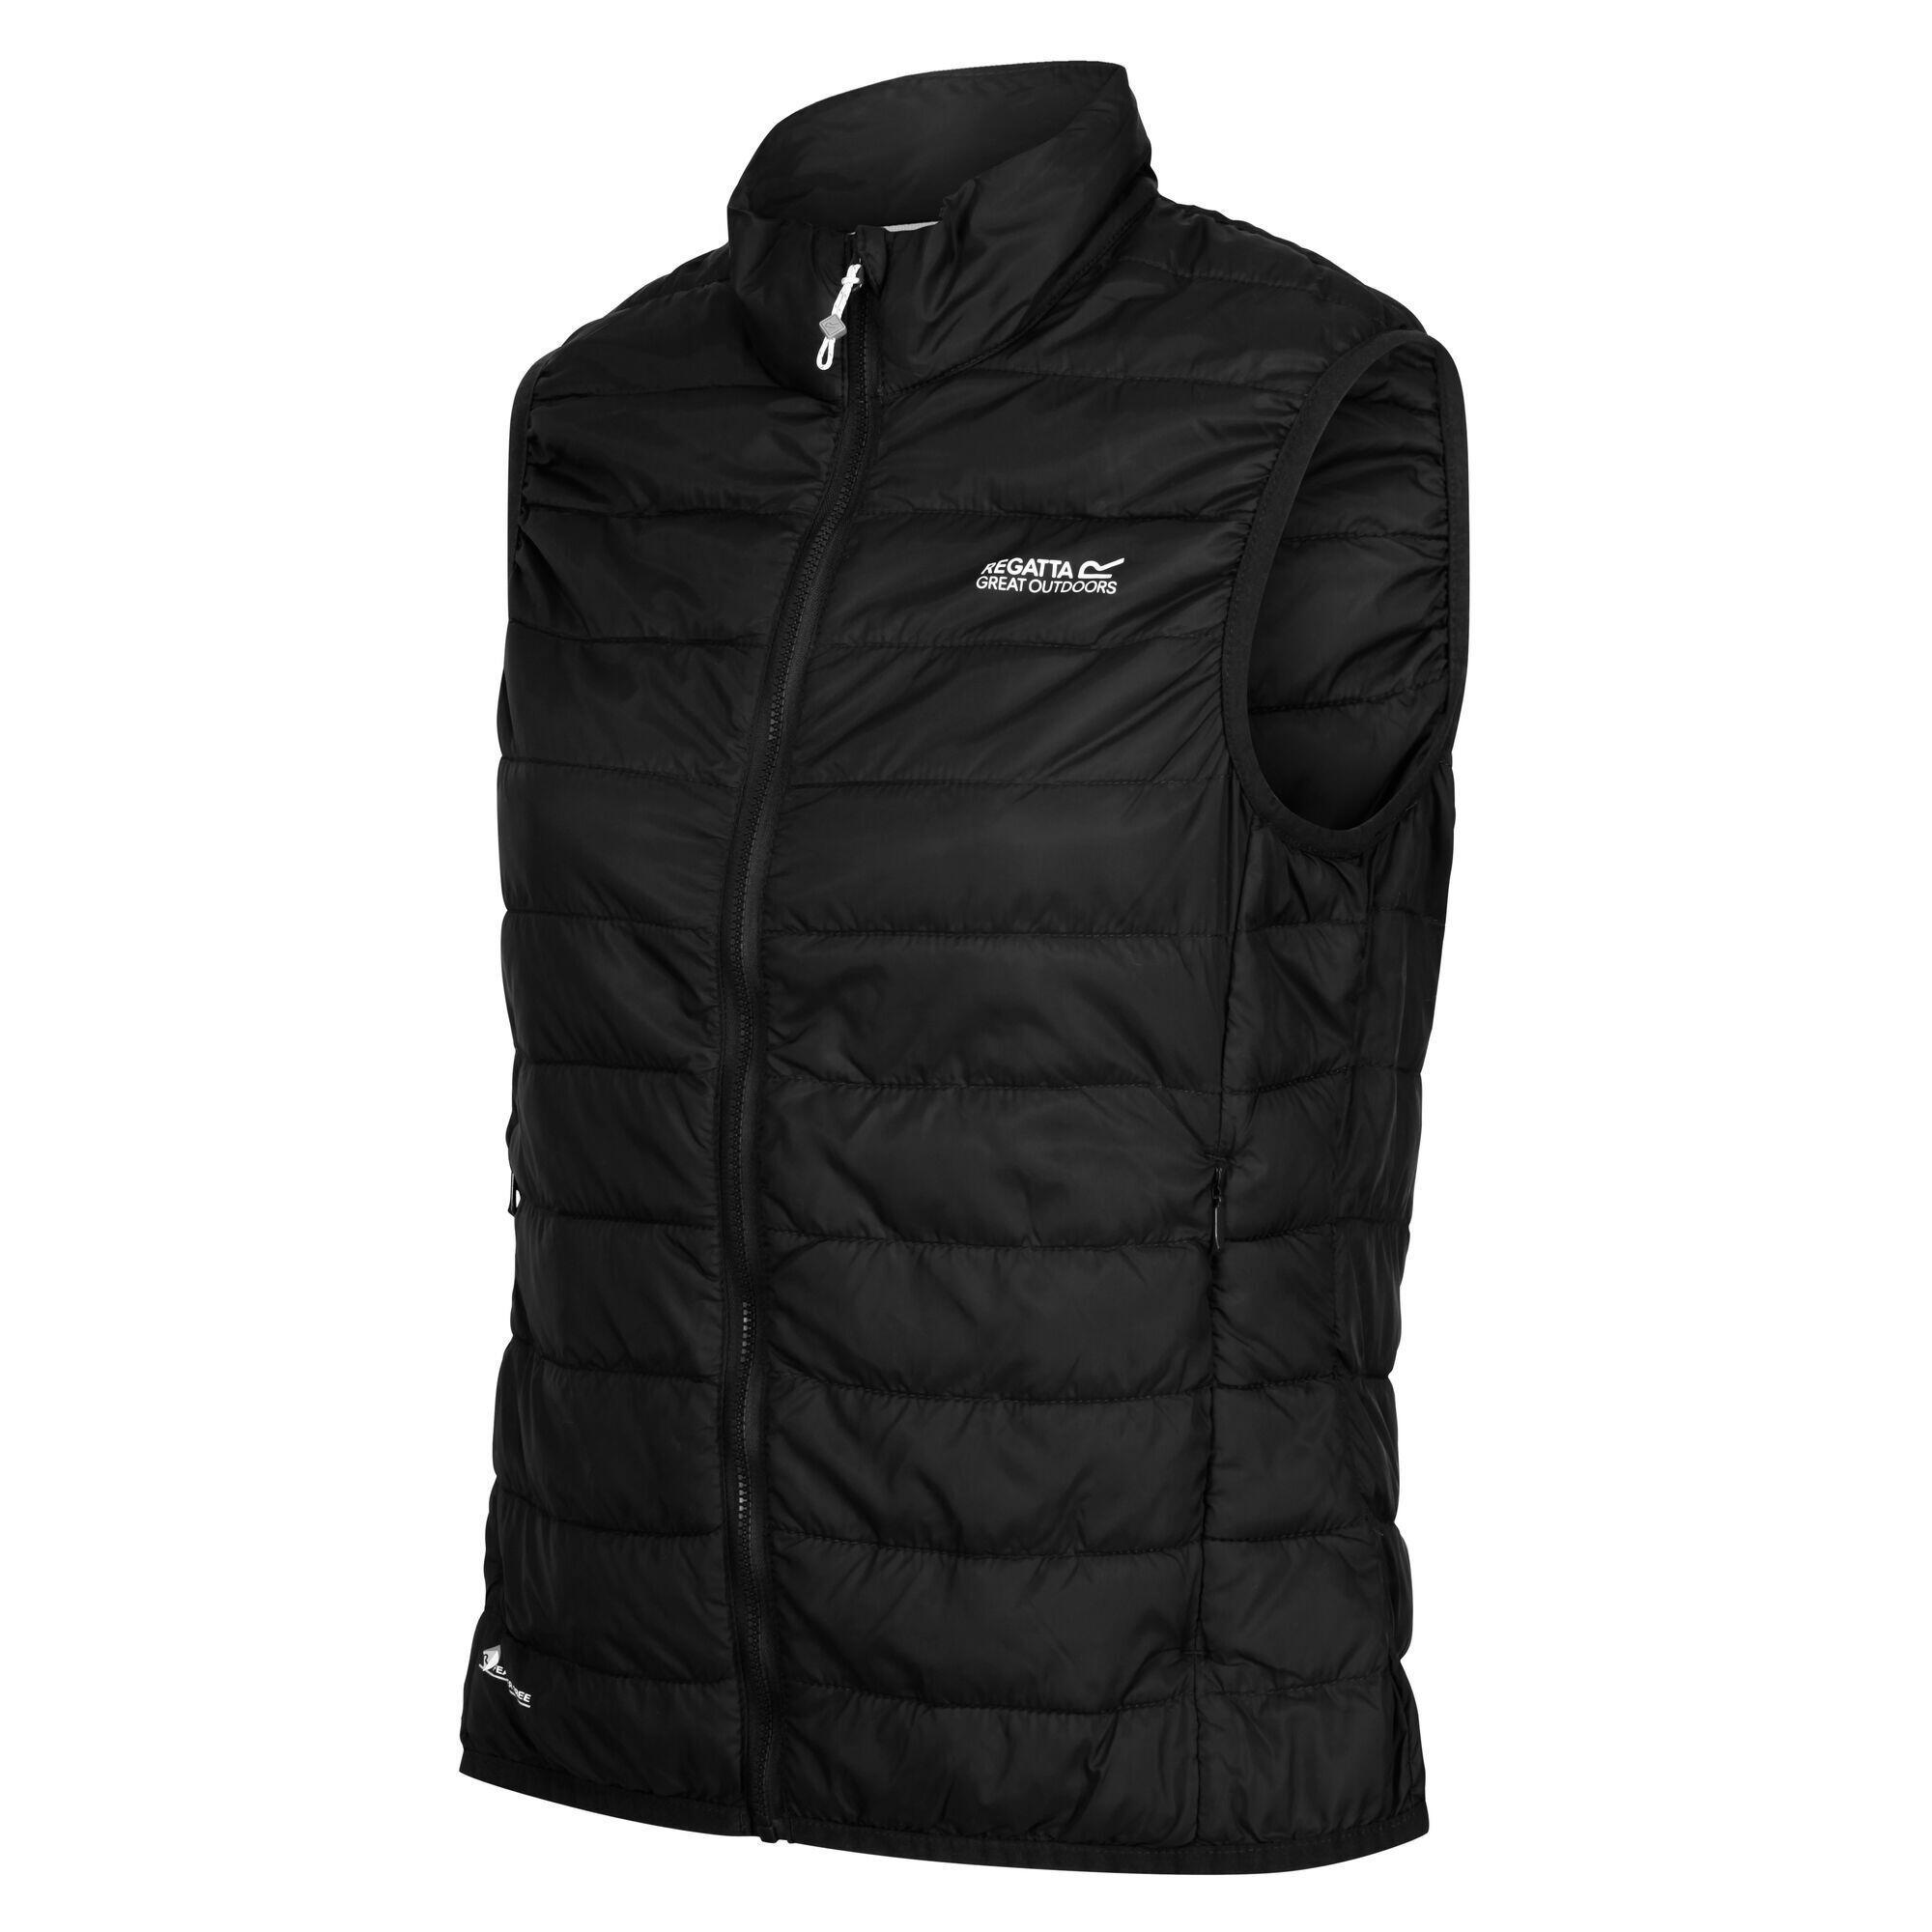 Womens/Ladies Hillpack Insulated Body Warmer (Black) 4/5